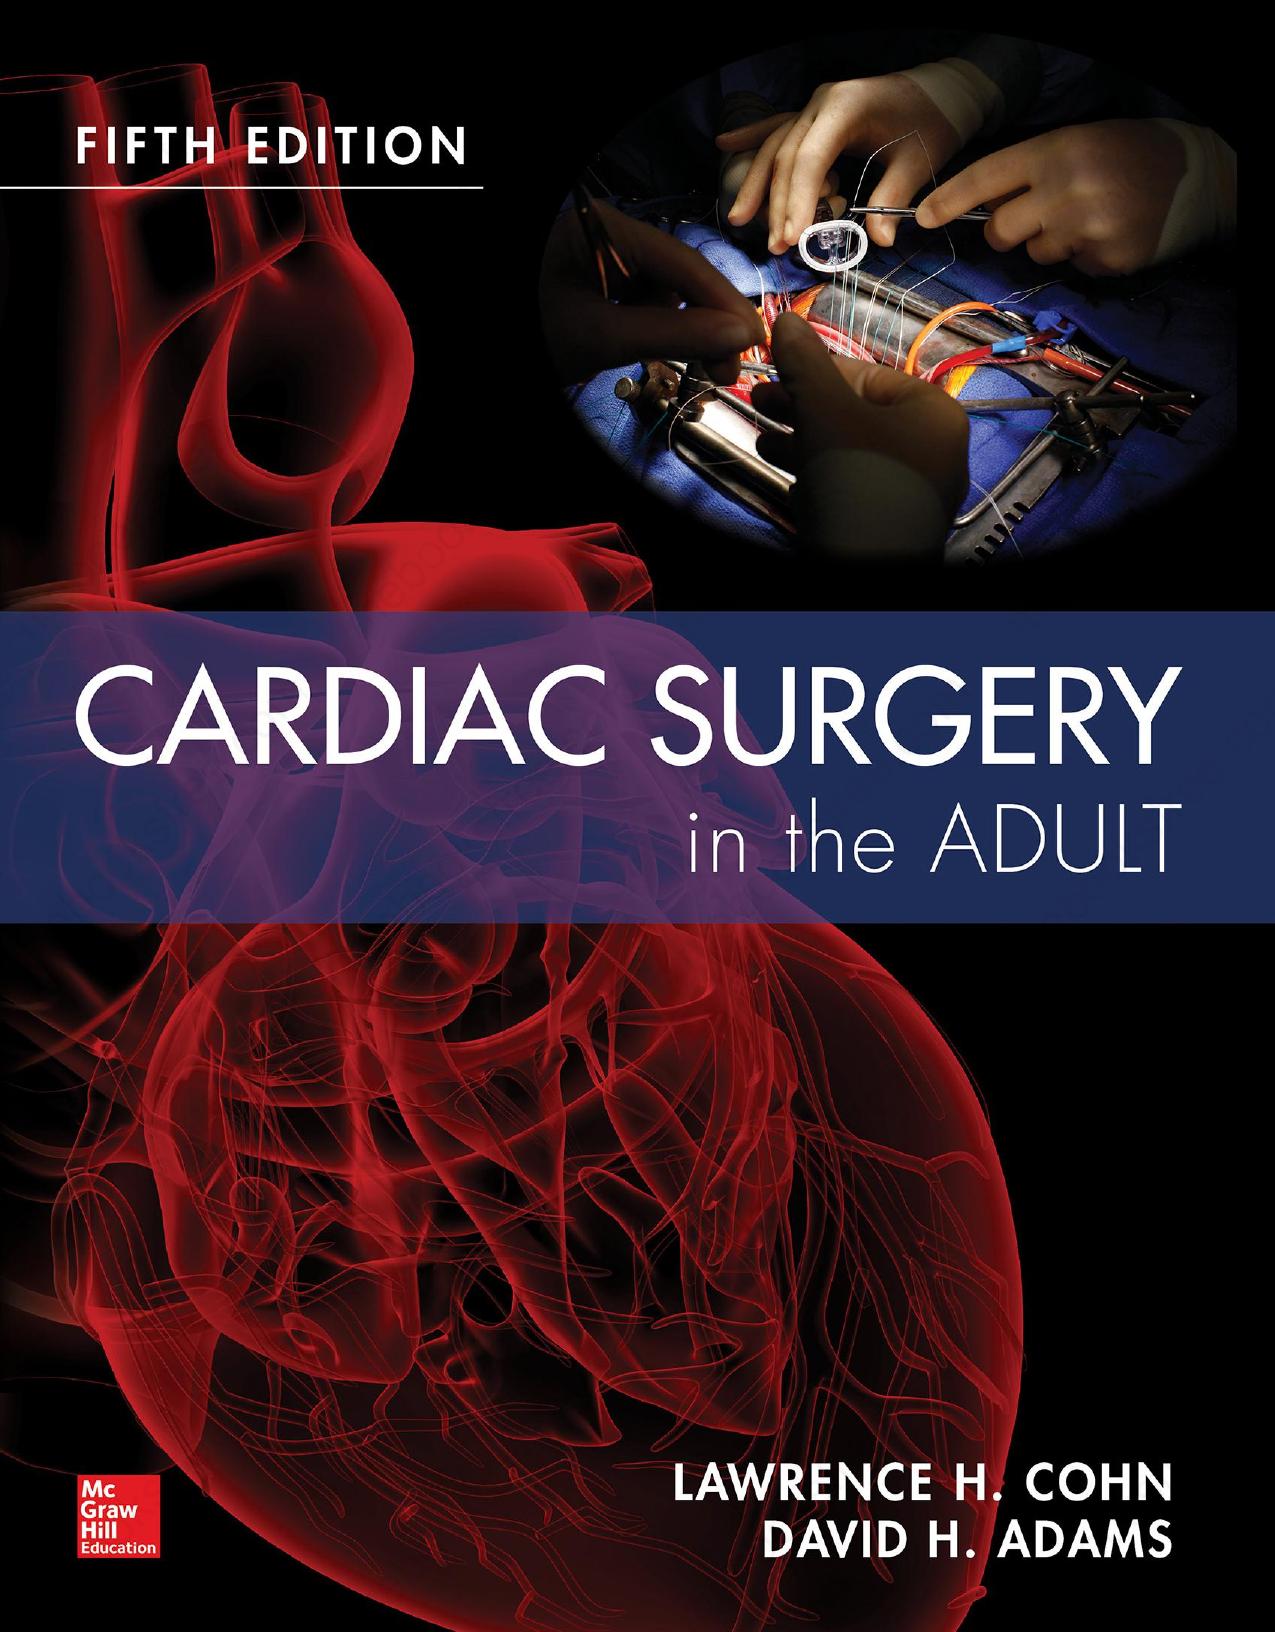 Cardiac Surgery in the Adult ( PDFDrive.com )